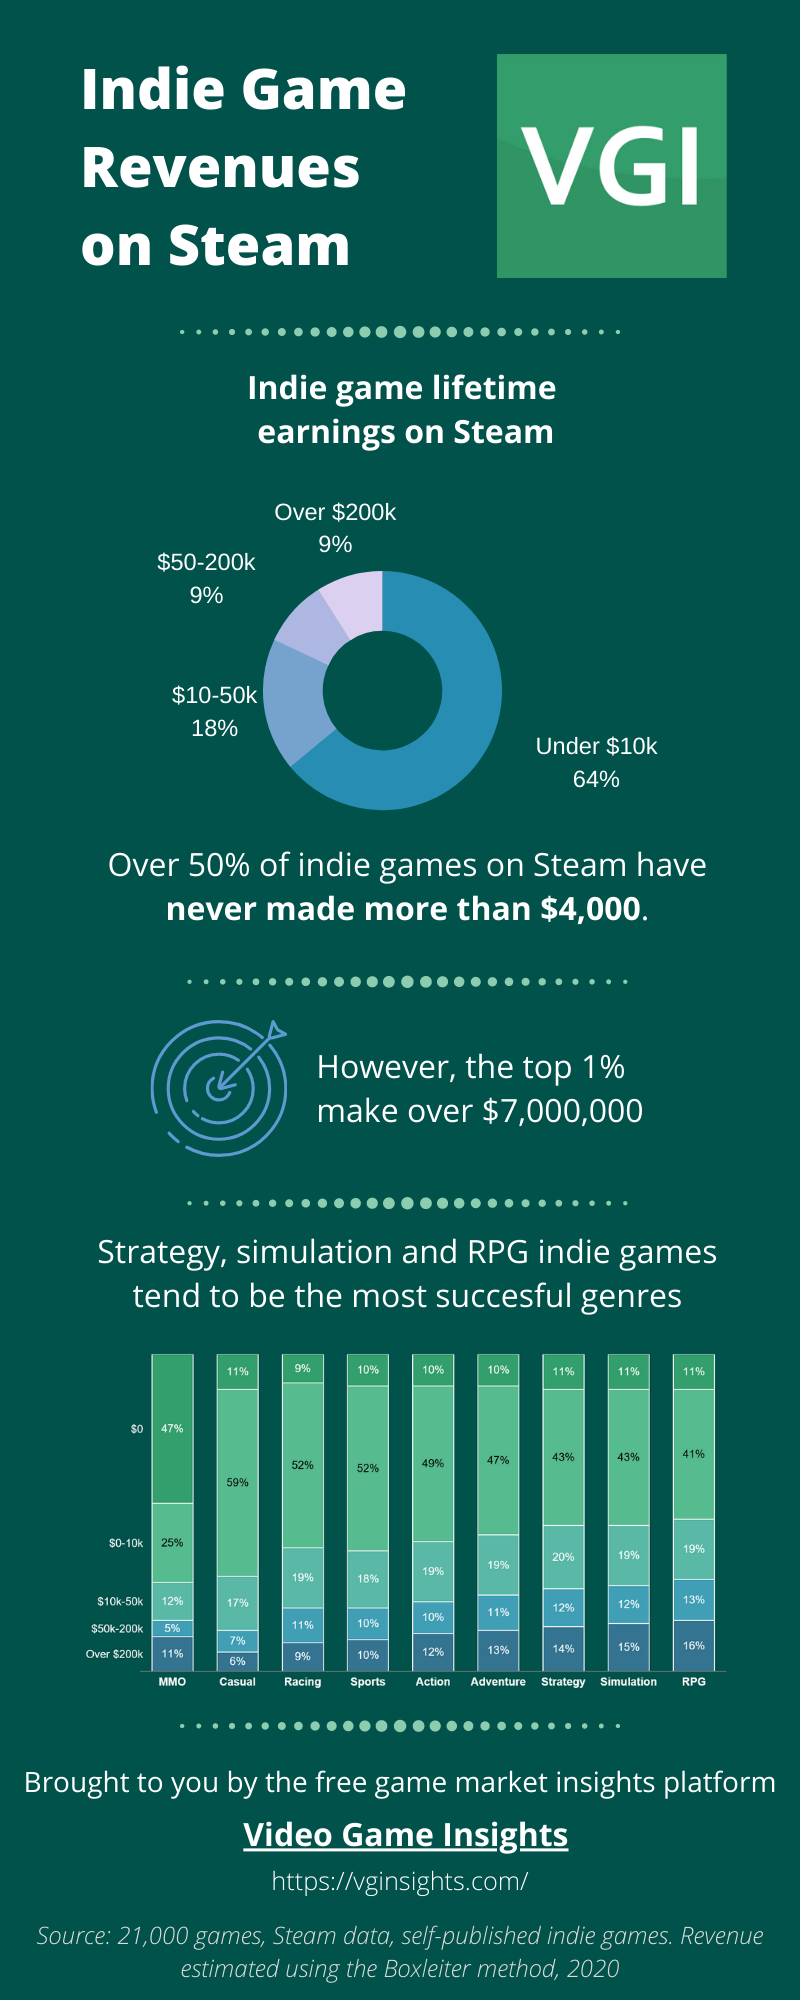 Video Game Insights: Game revenues on Steam infographic